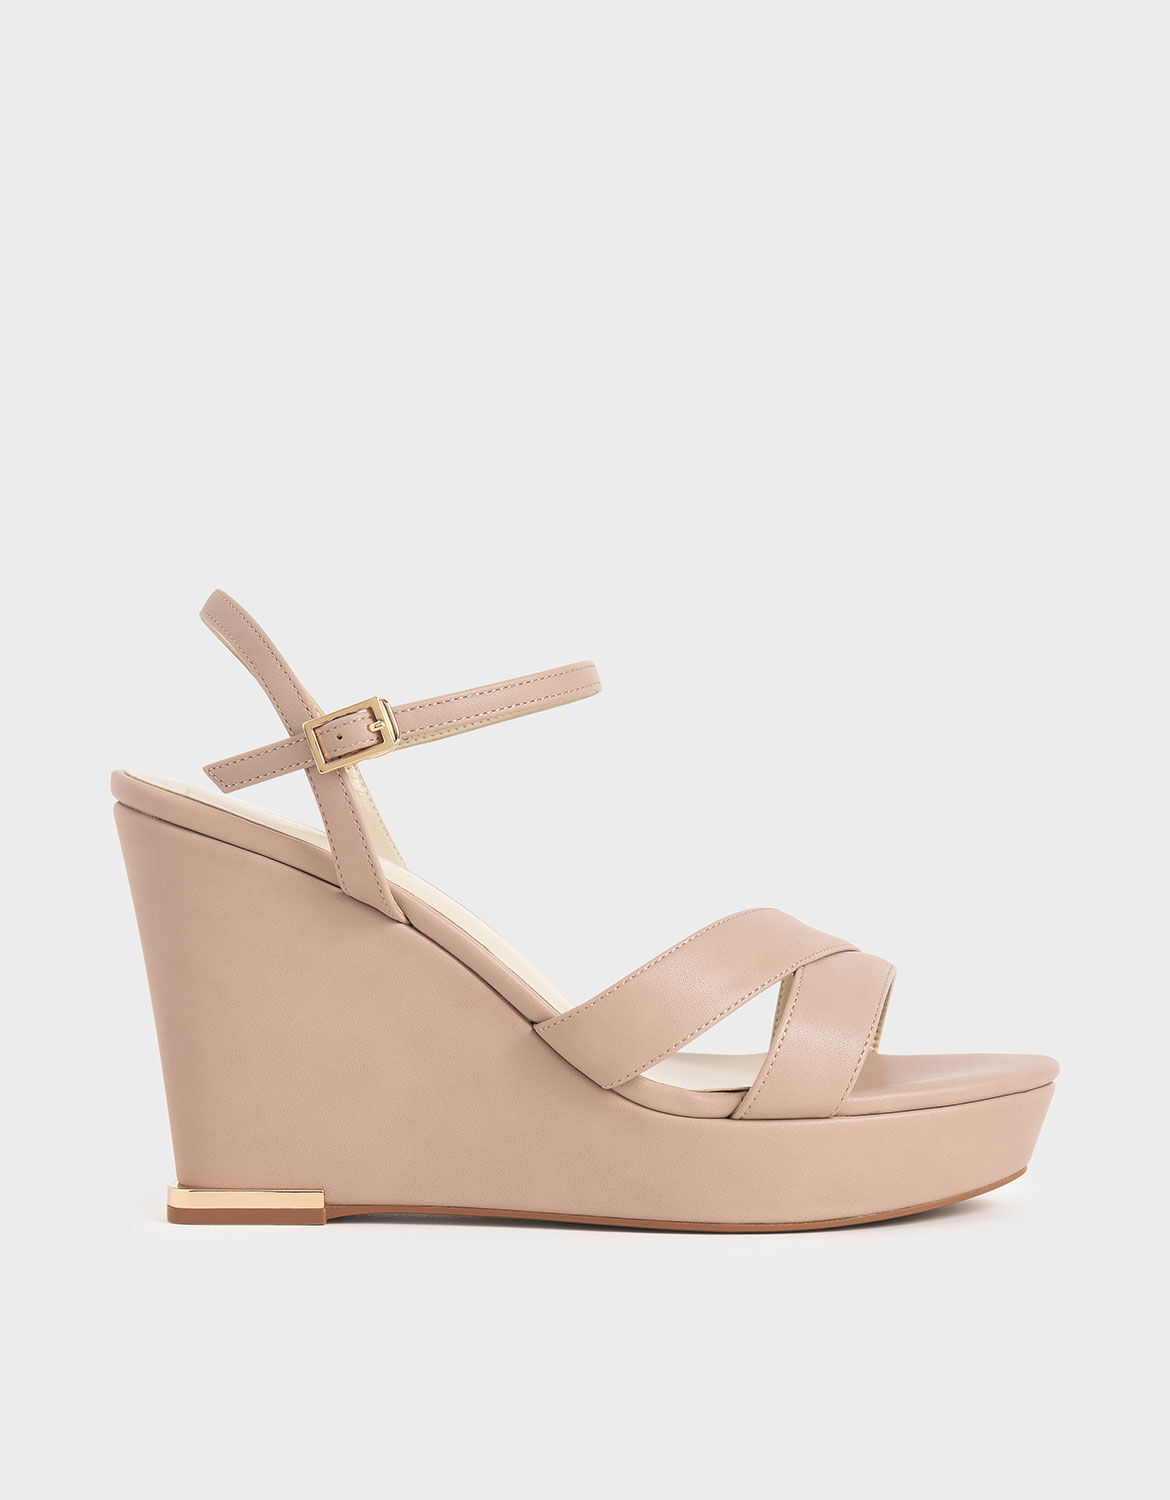 nude wedges near me